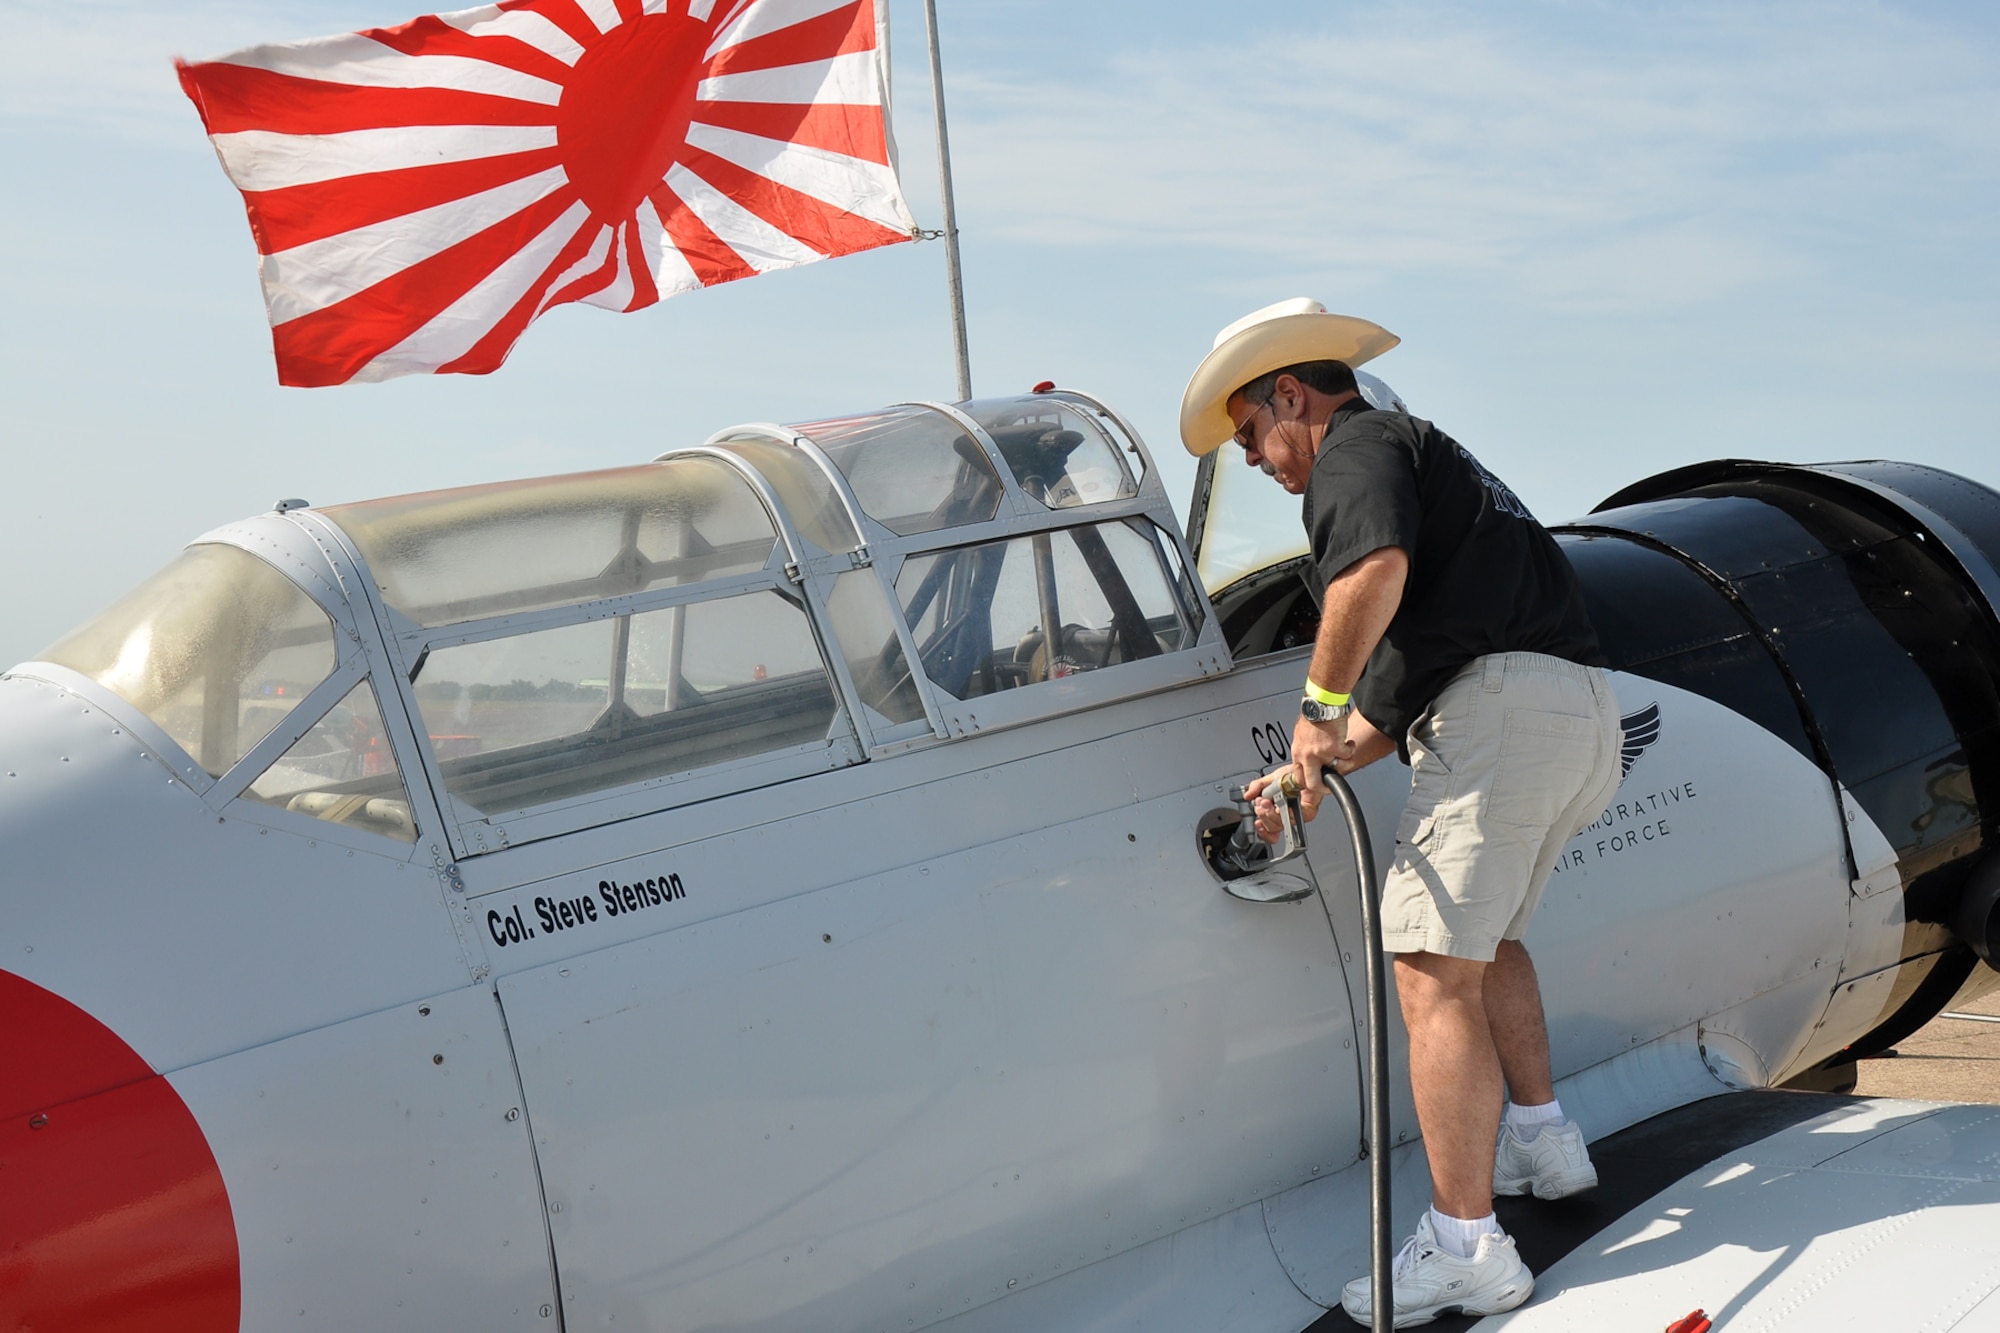 Graig Hutain, fuels his “Val” aircraft before performing in the “Wings Over Tyler Air Show” at Tyler Pounds Regional Airport, July 3, 2011. Hutain was flying a replica Japanese aircraft for the Commemorative Air Force’s “Tora! Tora! Tora!” performance, which recreates the 1941 attack on Pearl Harbor. Designed as a living history lesson, “Tora, Tora, Tora” is intended as a memorial to all the soldiers on both sides who gave their lives for their countries. The Aichi D3A, Allied reporting name “Val” was a World War II carrier-borne dive bomber of the Imperial Japanese Navy. It participated in almost all actions, including Pearl Harbor. (U.S. Air Force photo/Tech. Sgt. Jeff Walston)